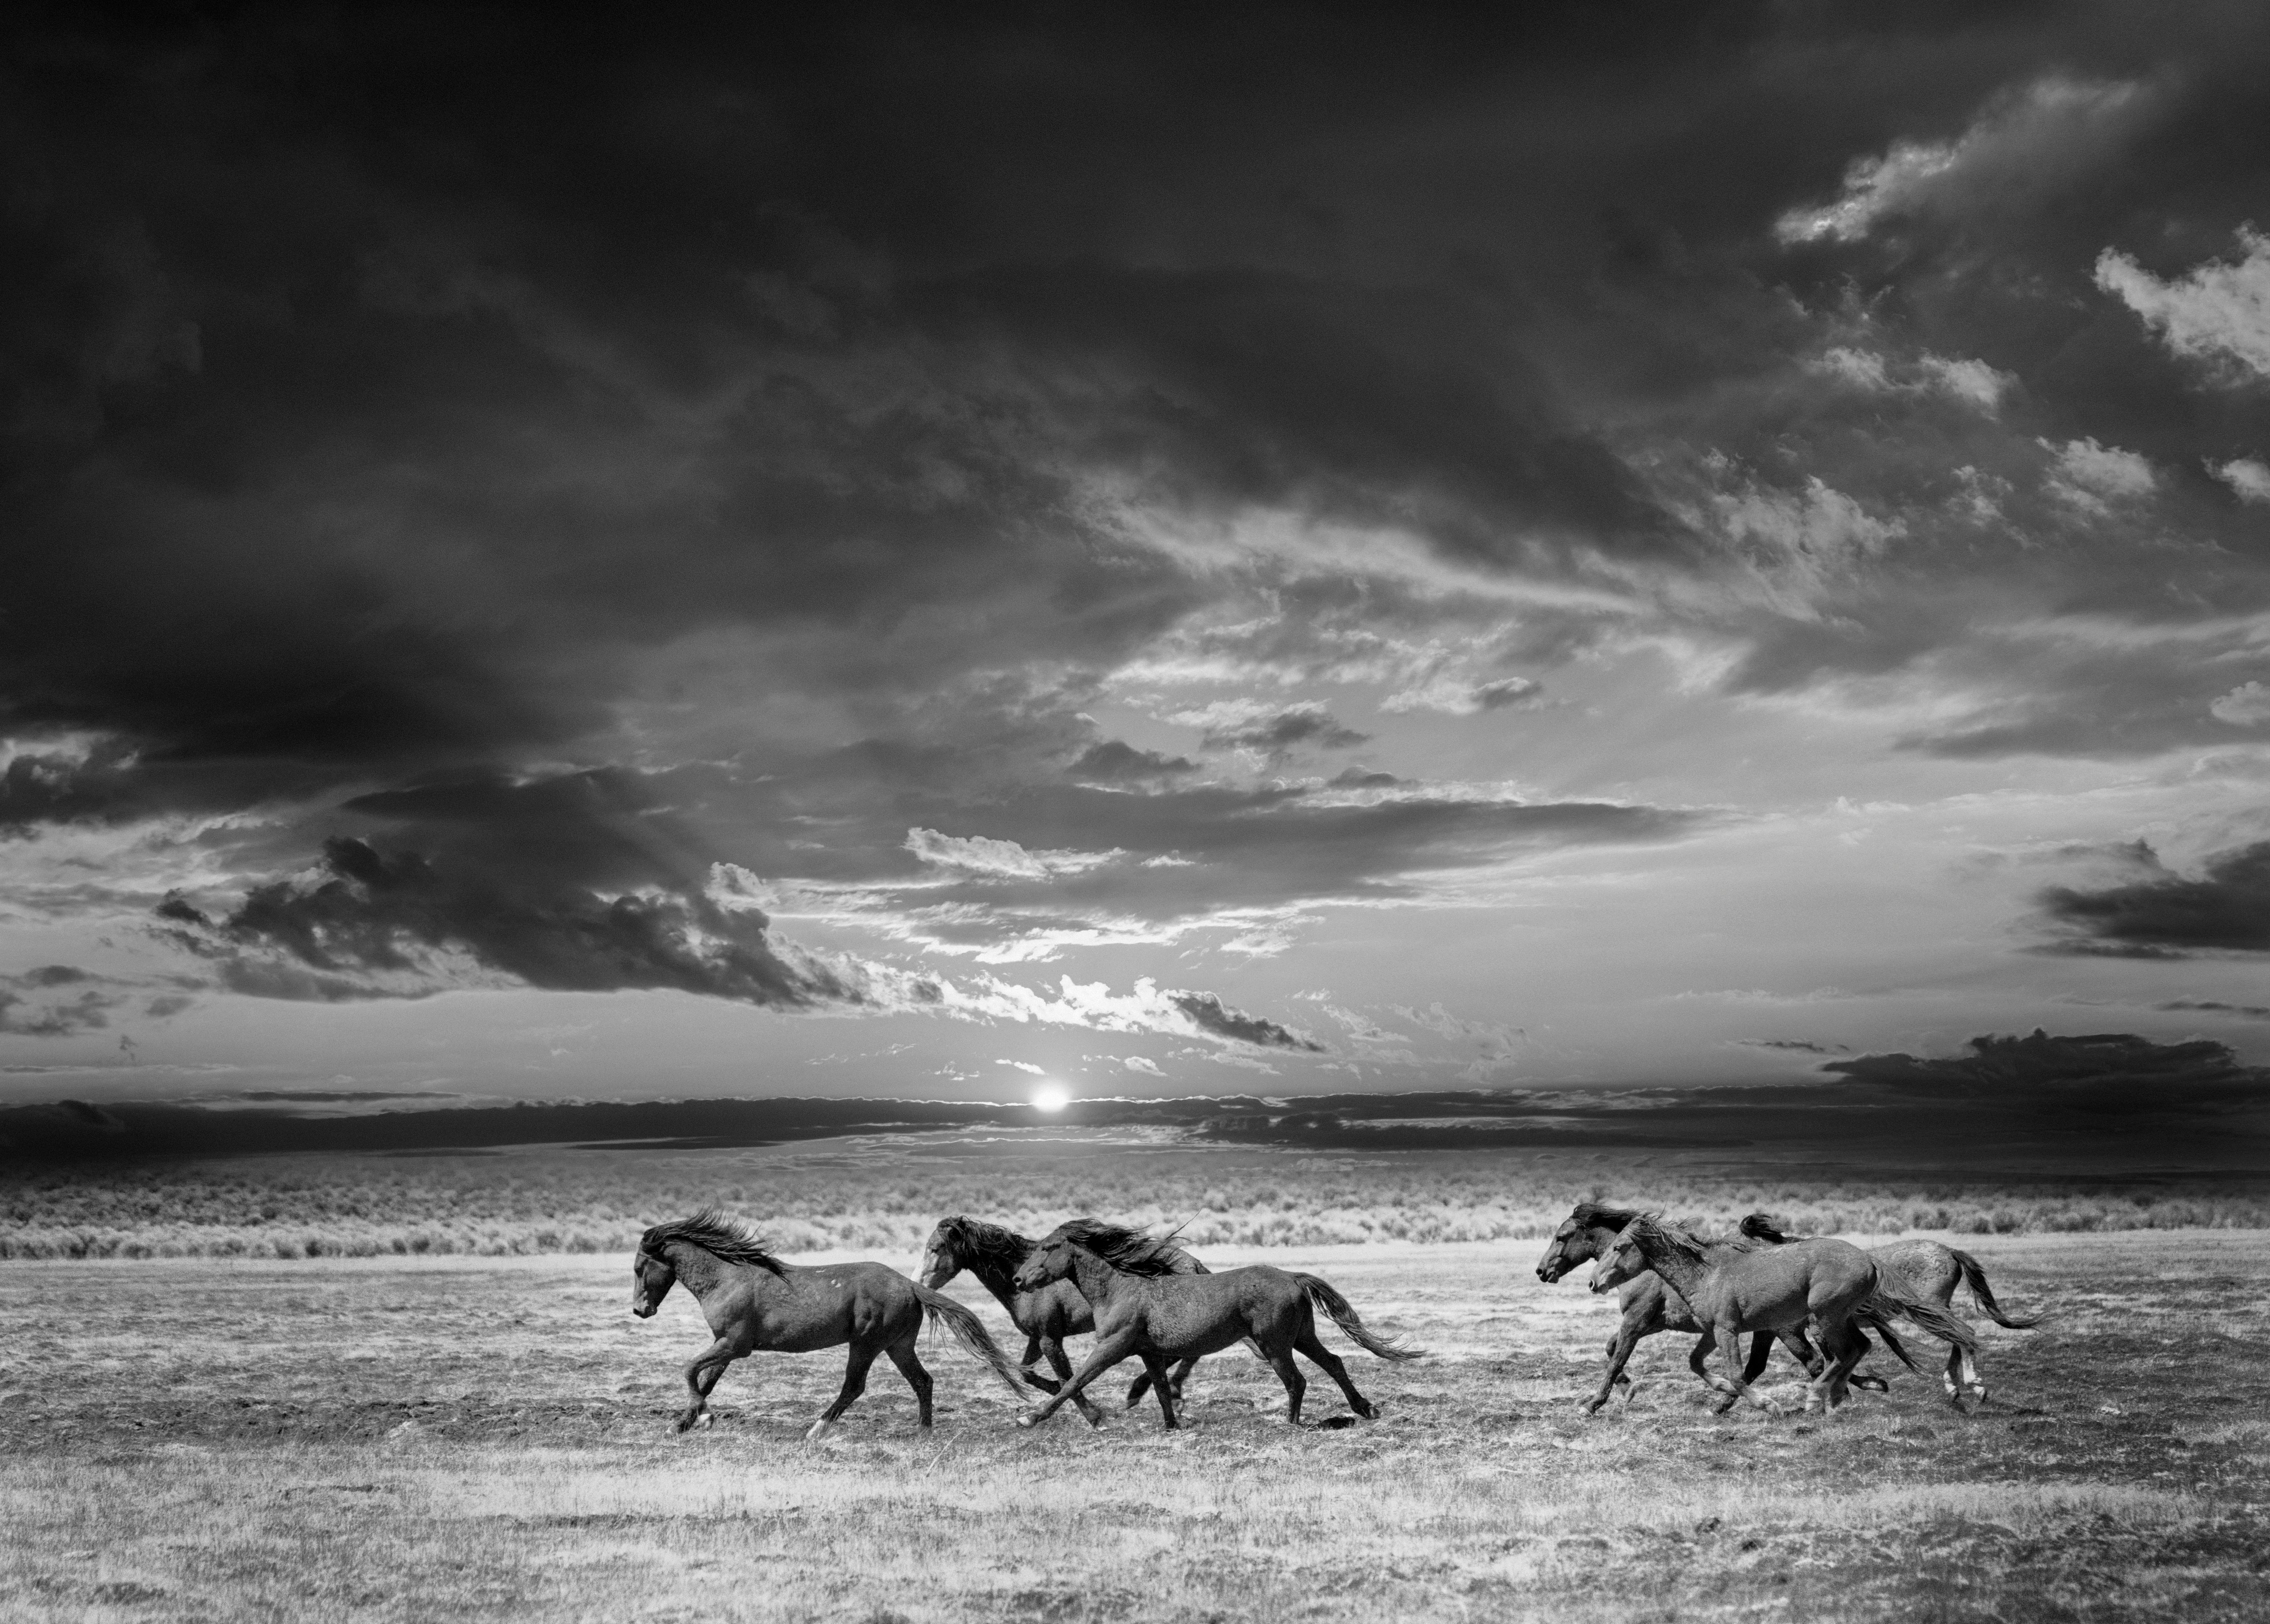 Shane Russeck Animal Print - "Chasing the Light" 36x48 Black and White Photography of Wild Horses, Photograph